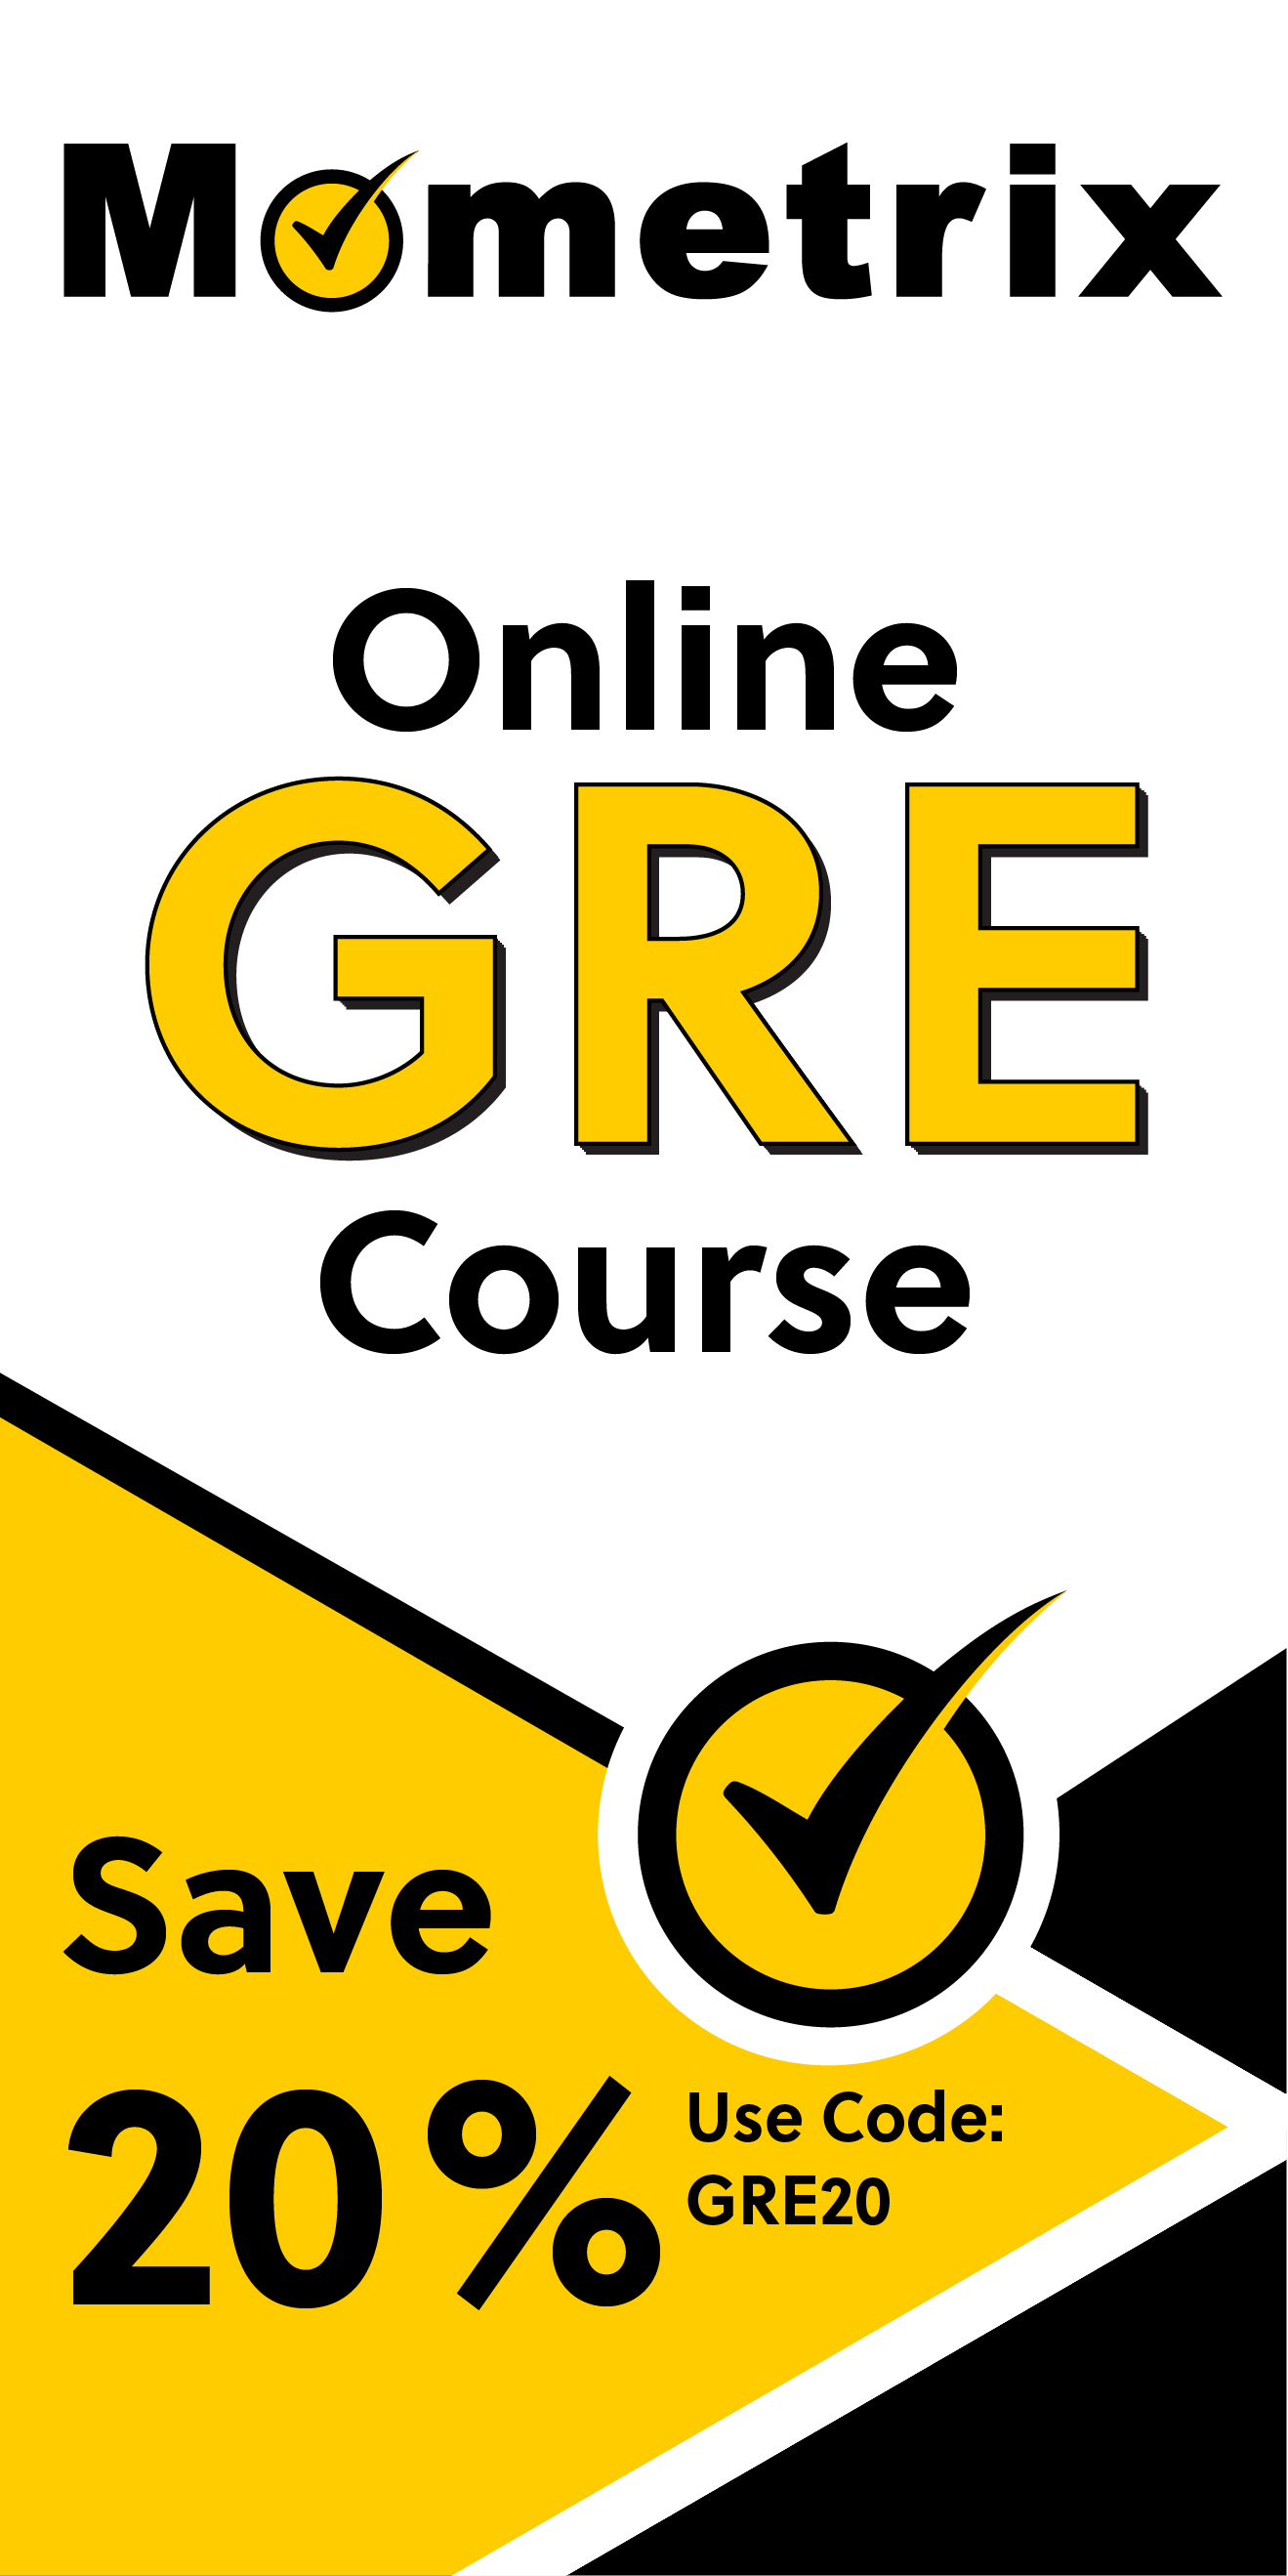 Click here for 20% off of Mometrix GRE online course. Use code: GRE20